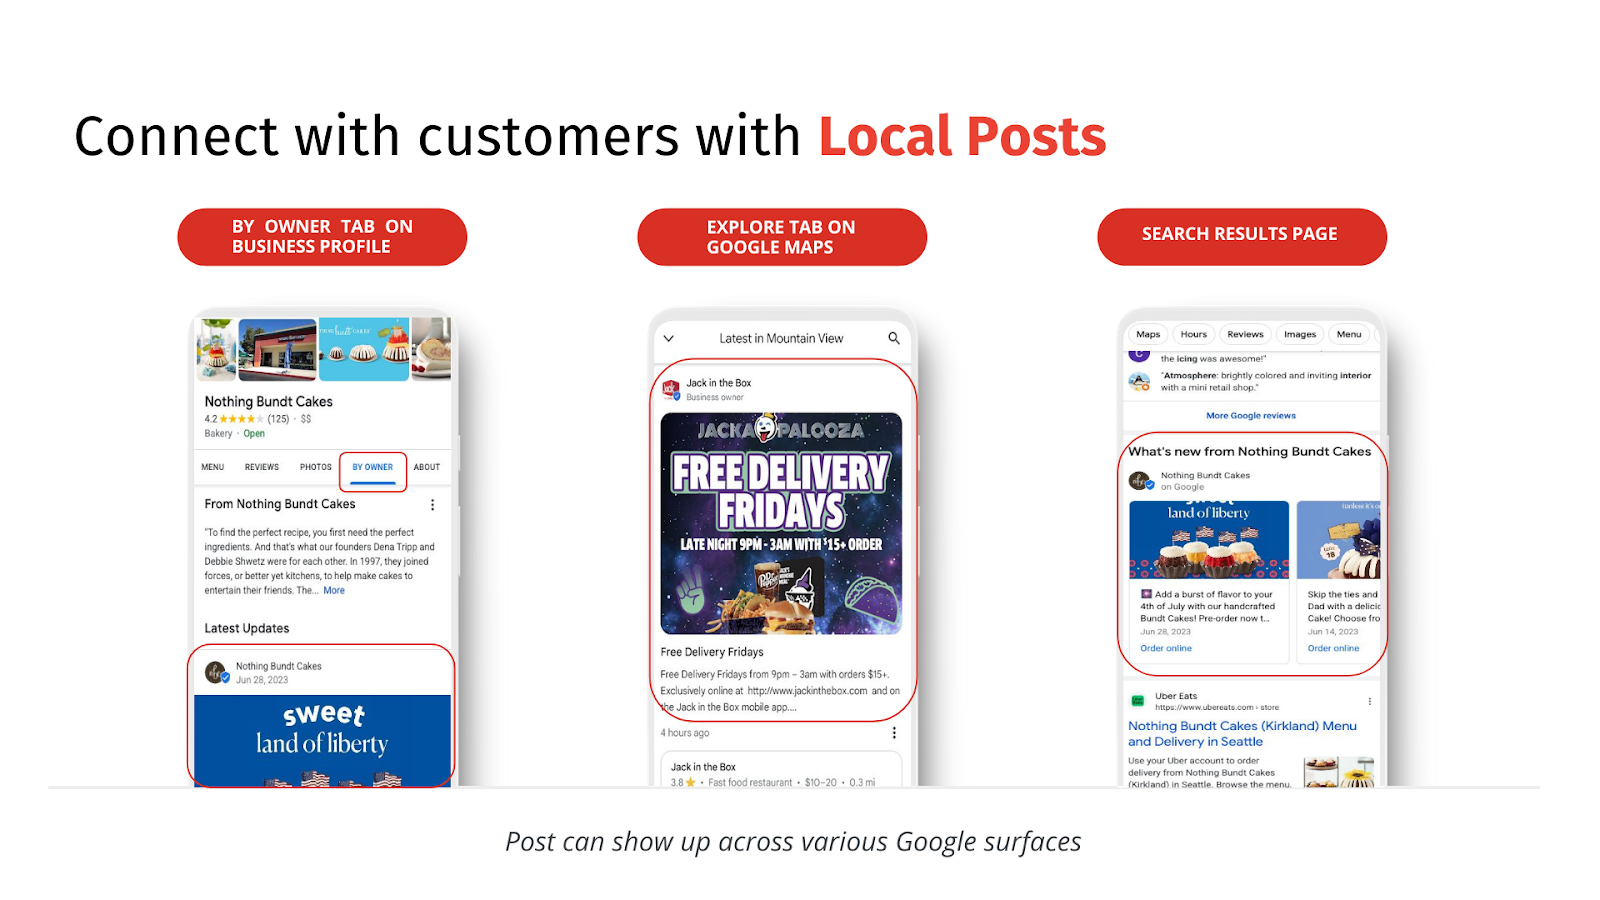 Google offers Local Posts for Google Business Profiles